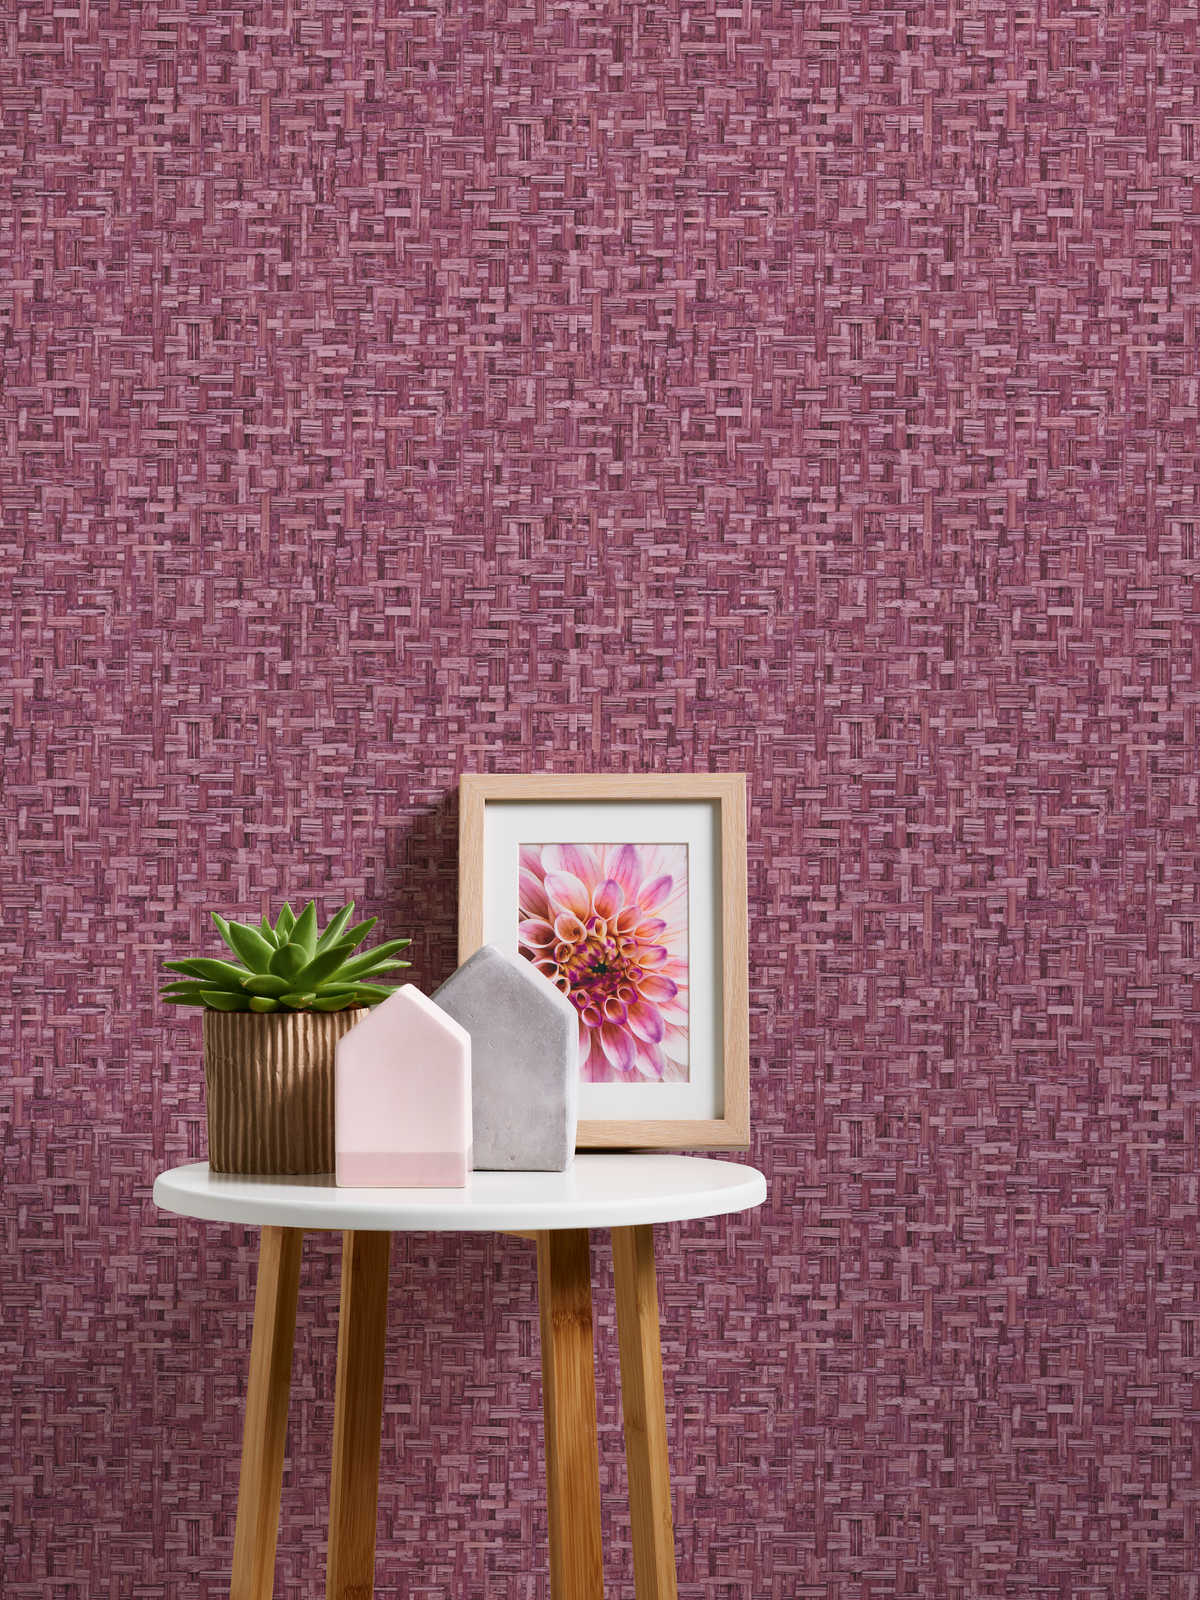             Non-woven wallpaper purple with braid pattern & texture design - pink, red
        